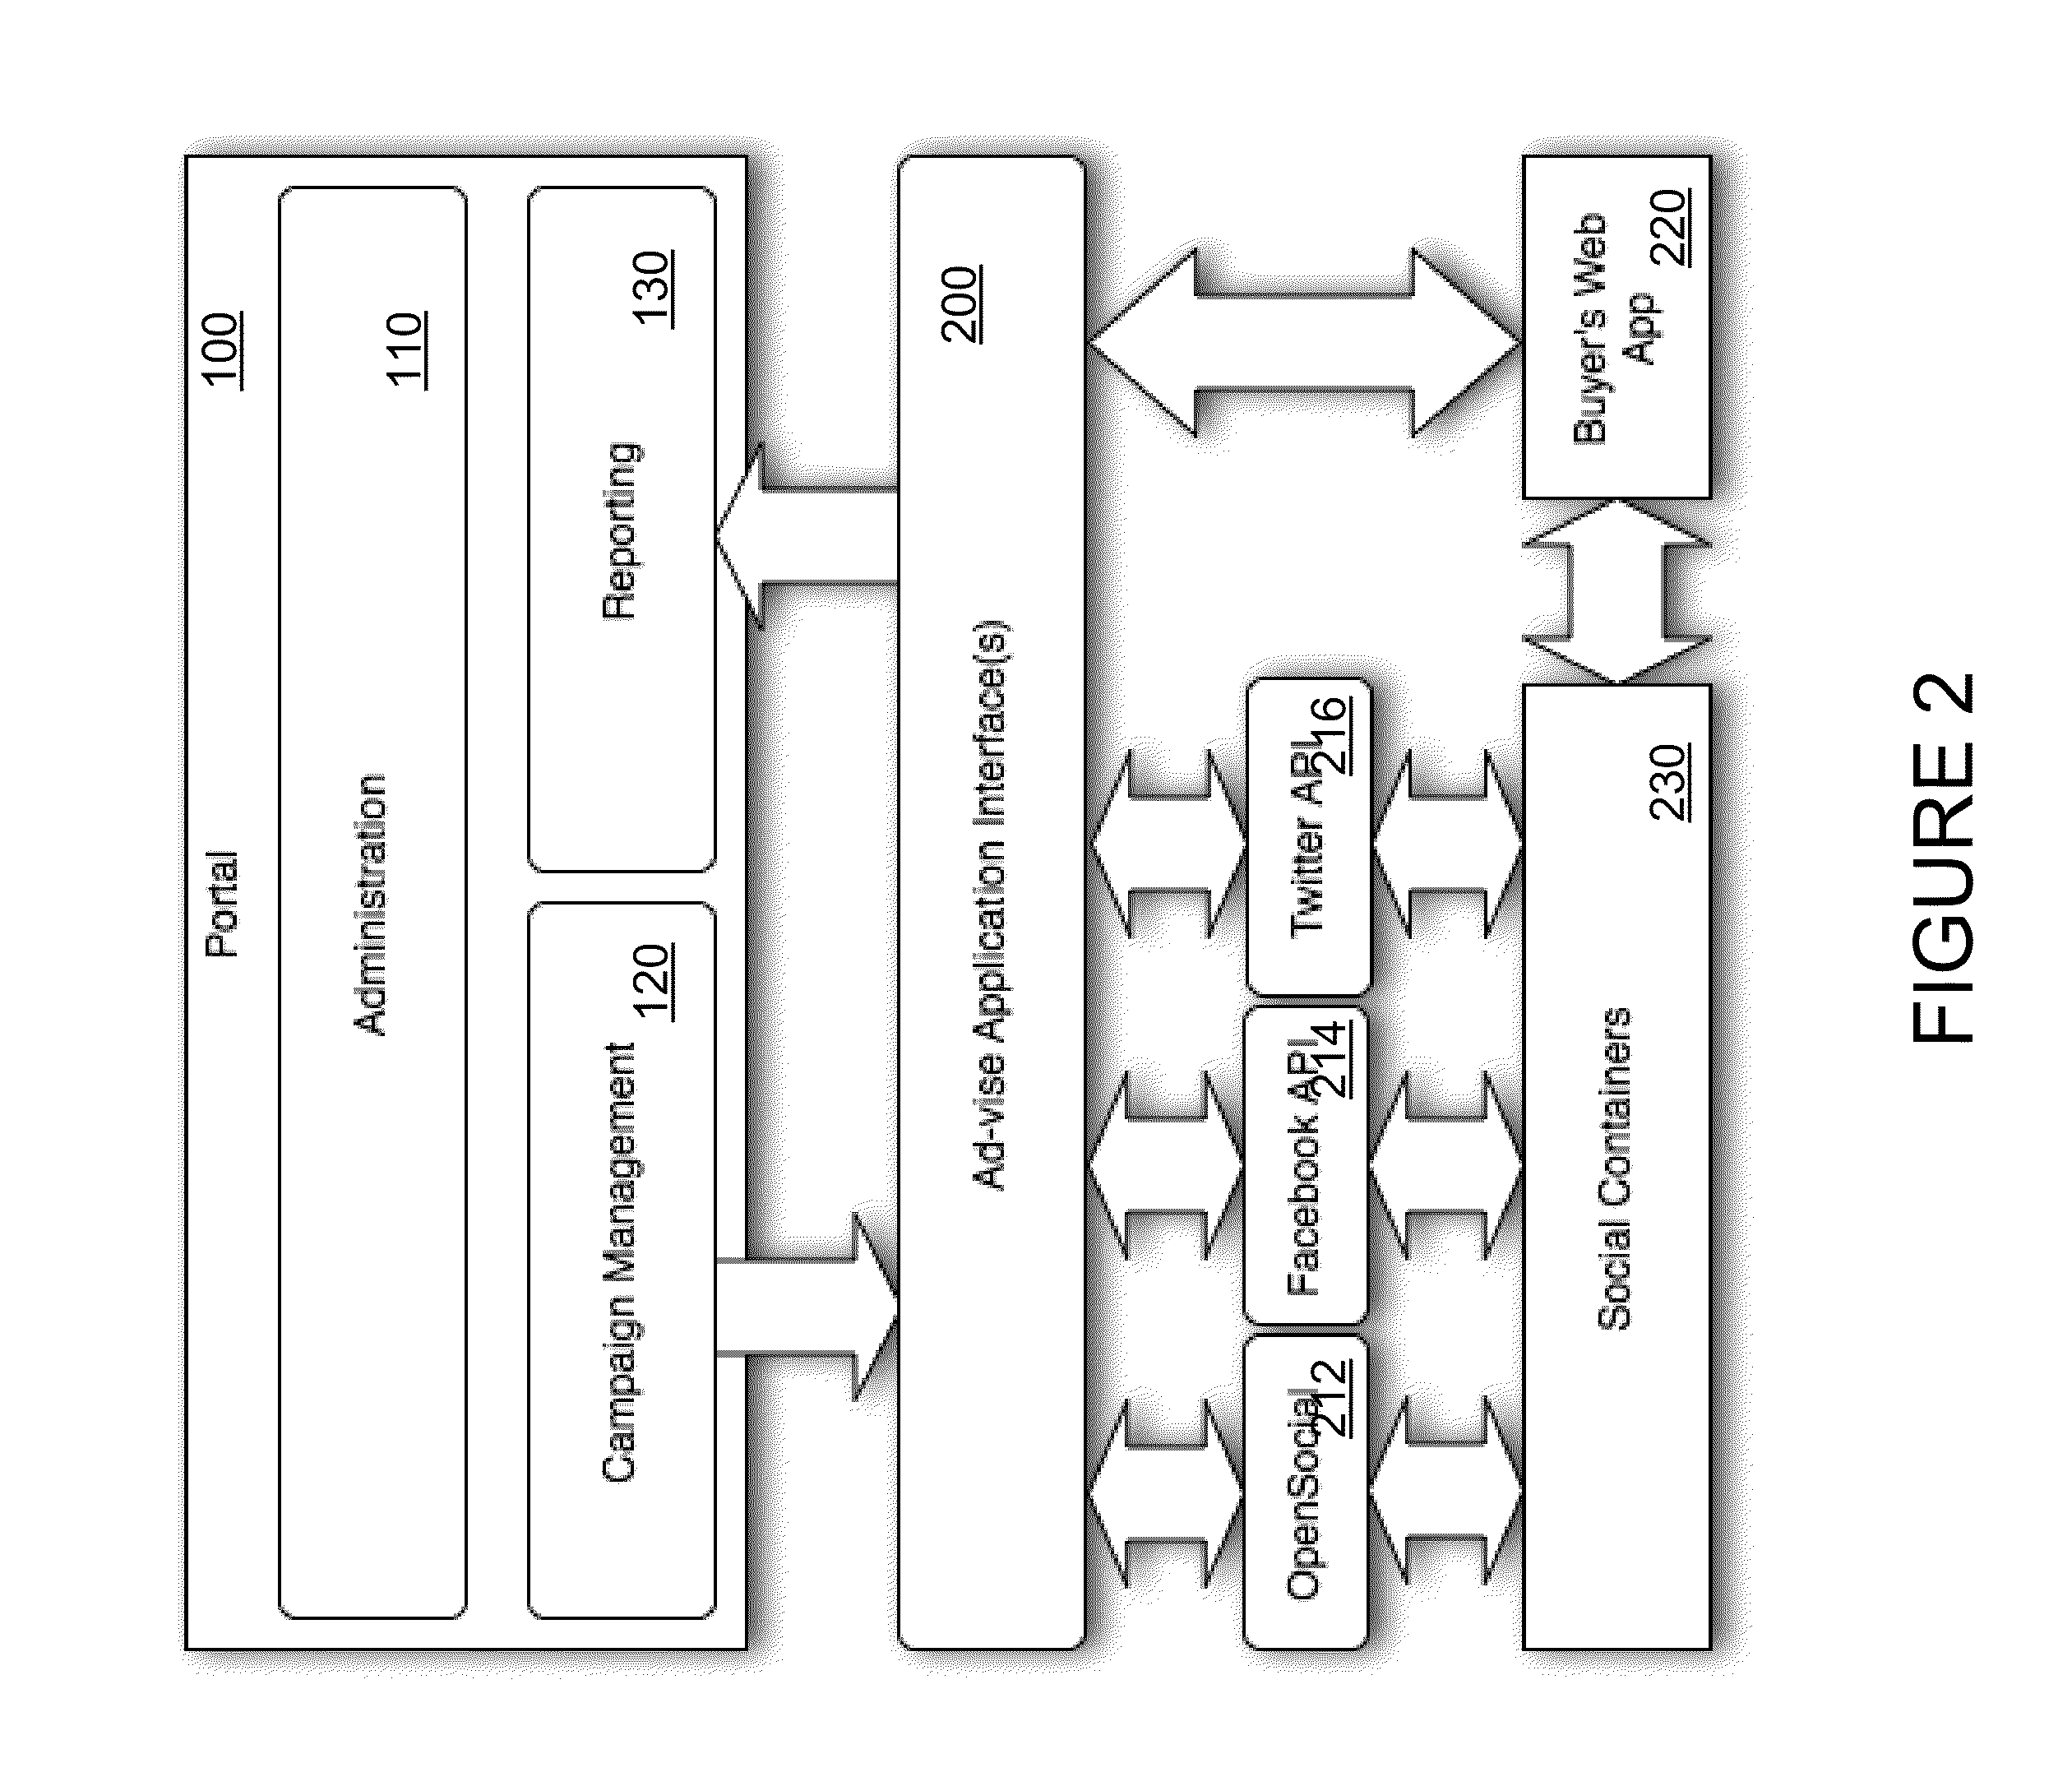 Merchandising amplification via social networking system and method